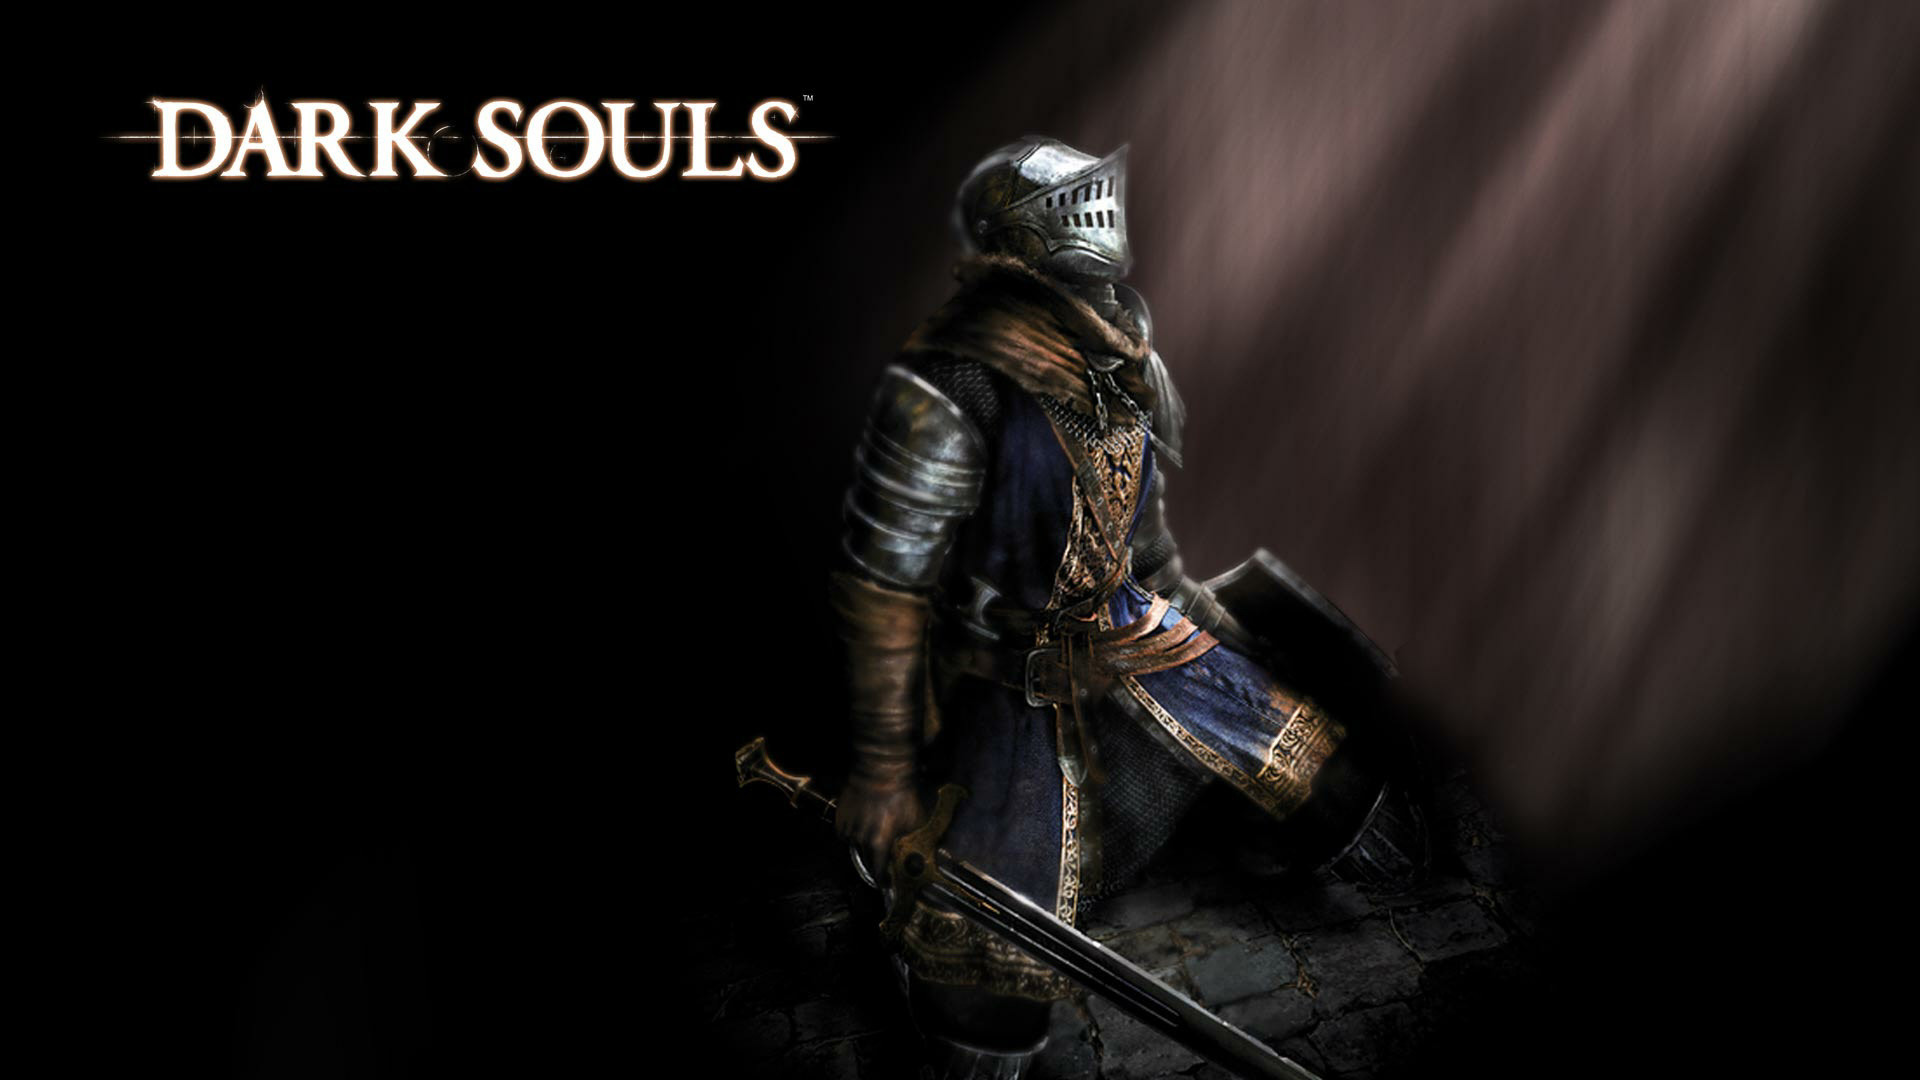 1920x1080 Dark Souls Wallpapers in HD | Page 2